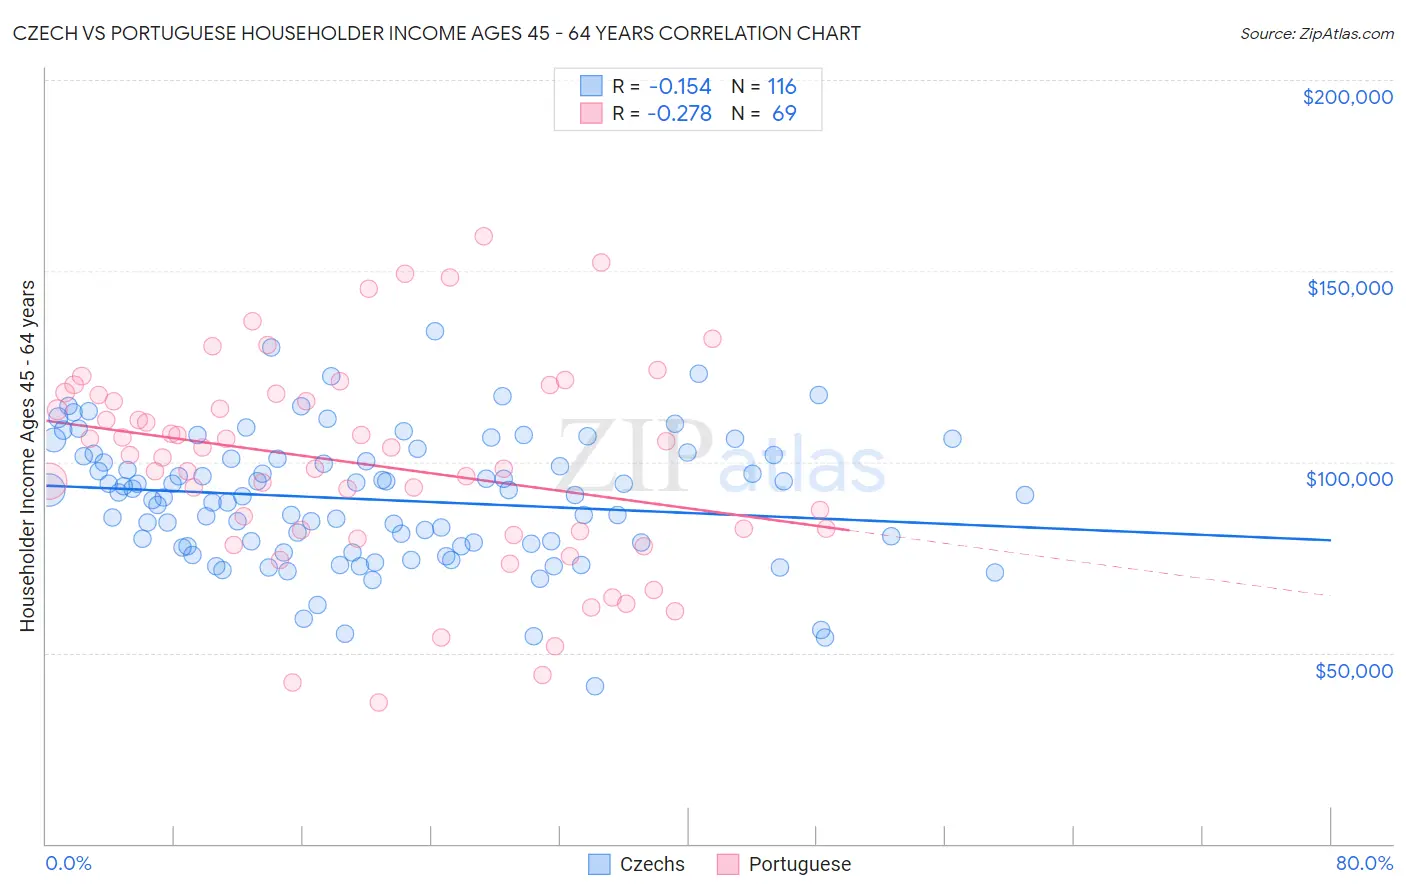 Czech vs Portuguese Householder Income Ages 45 - 64 years